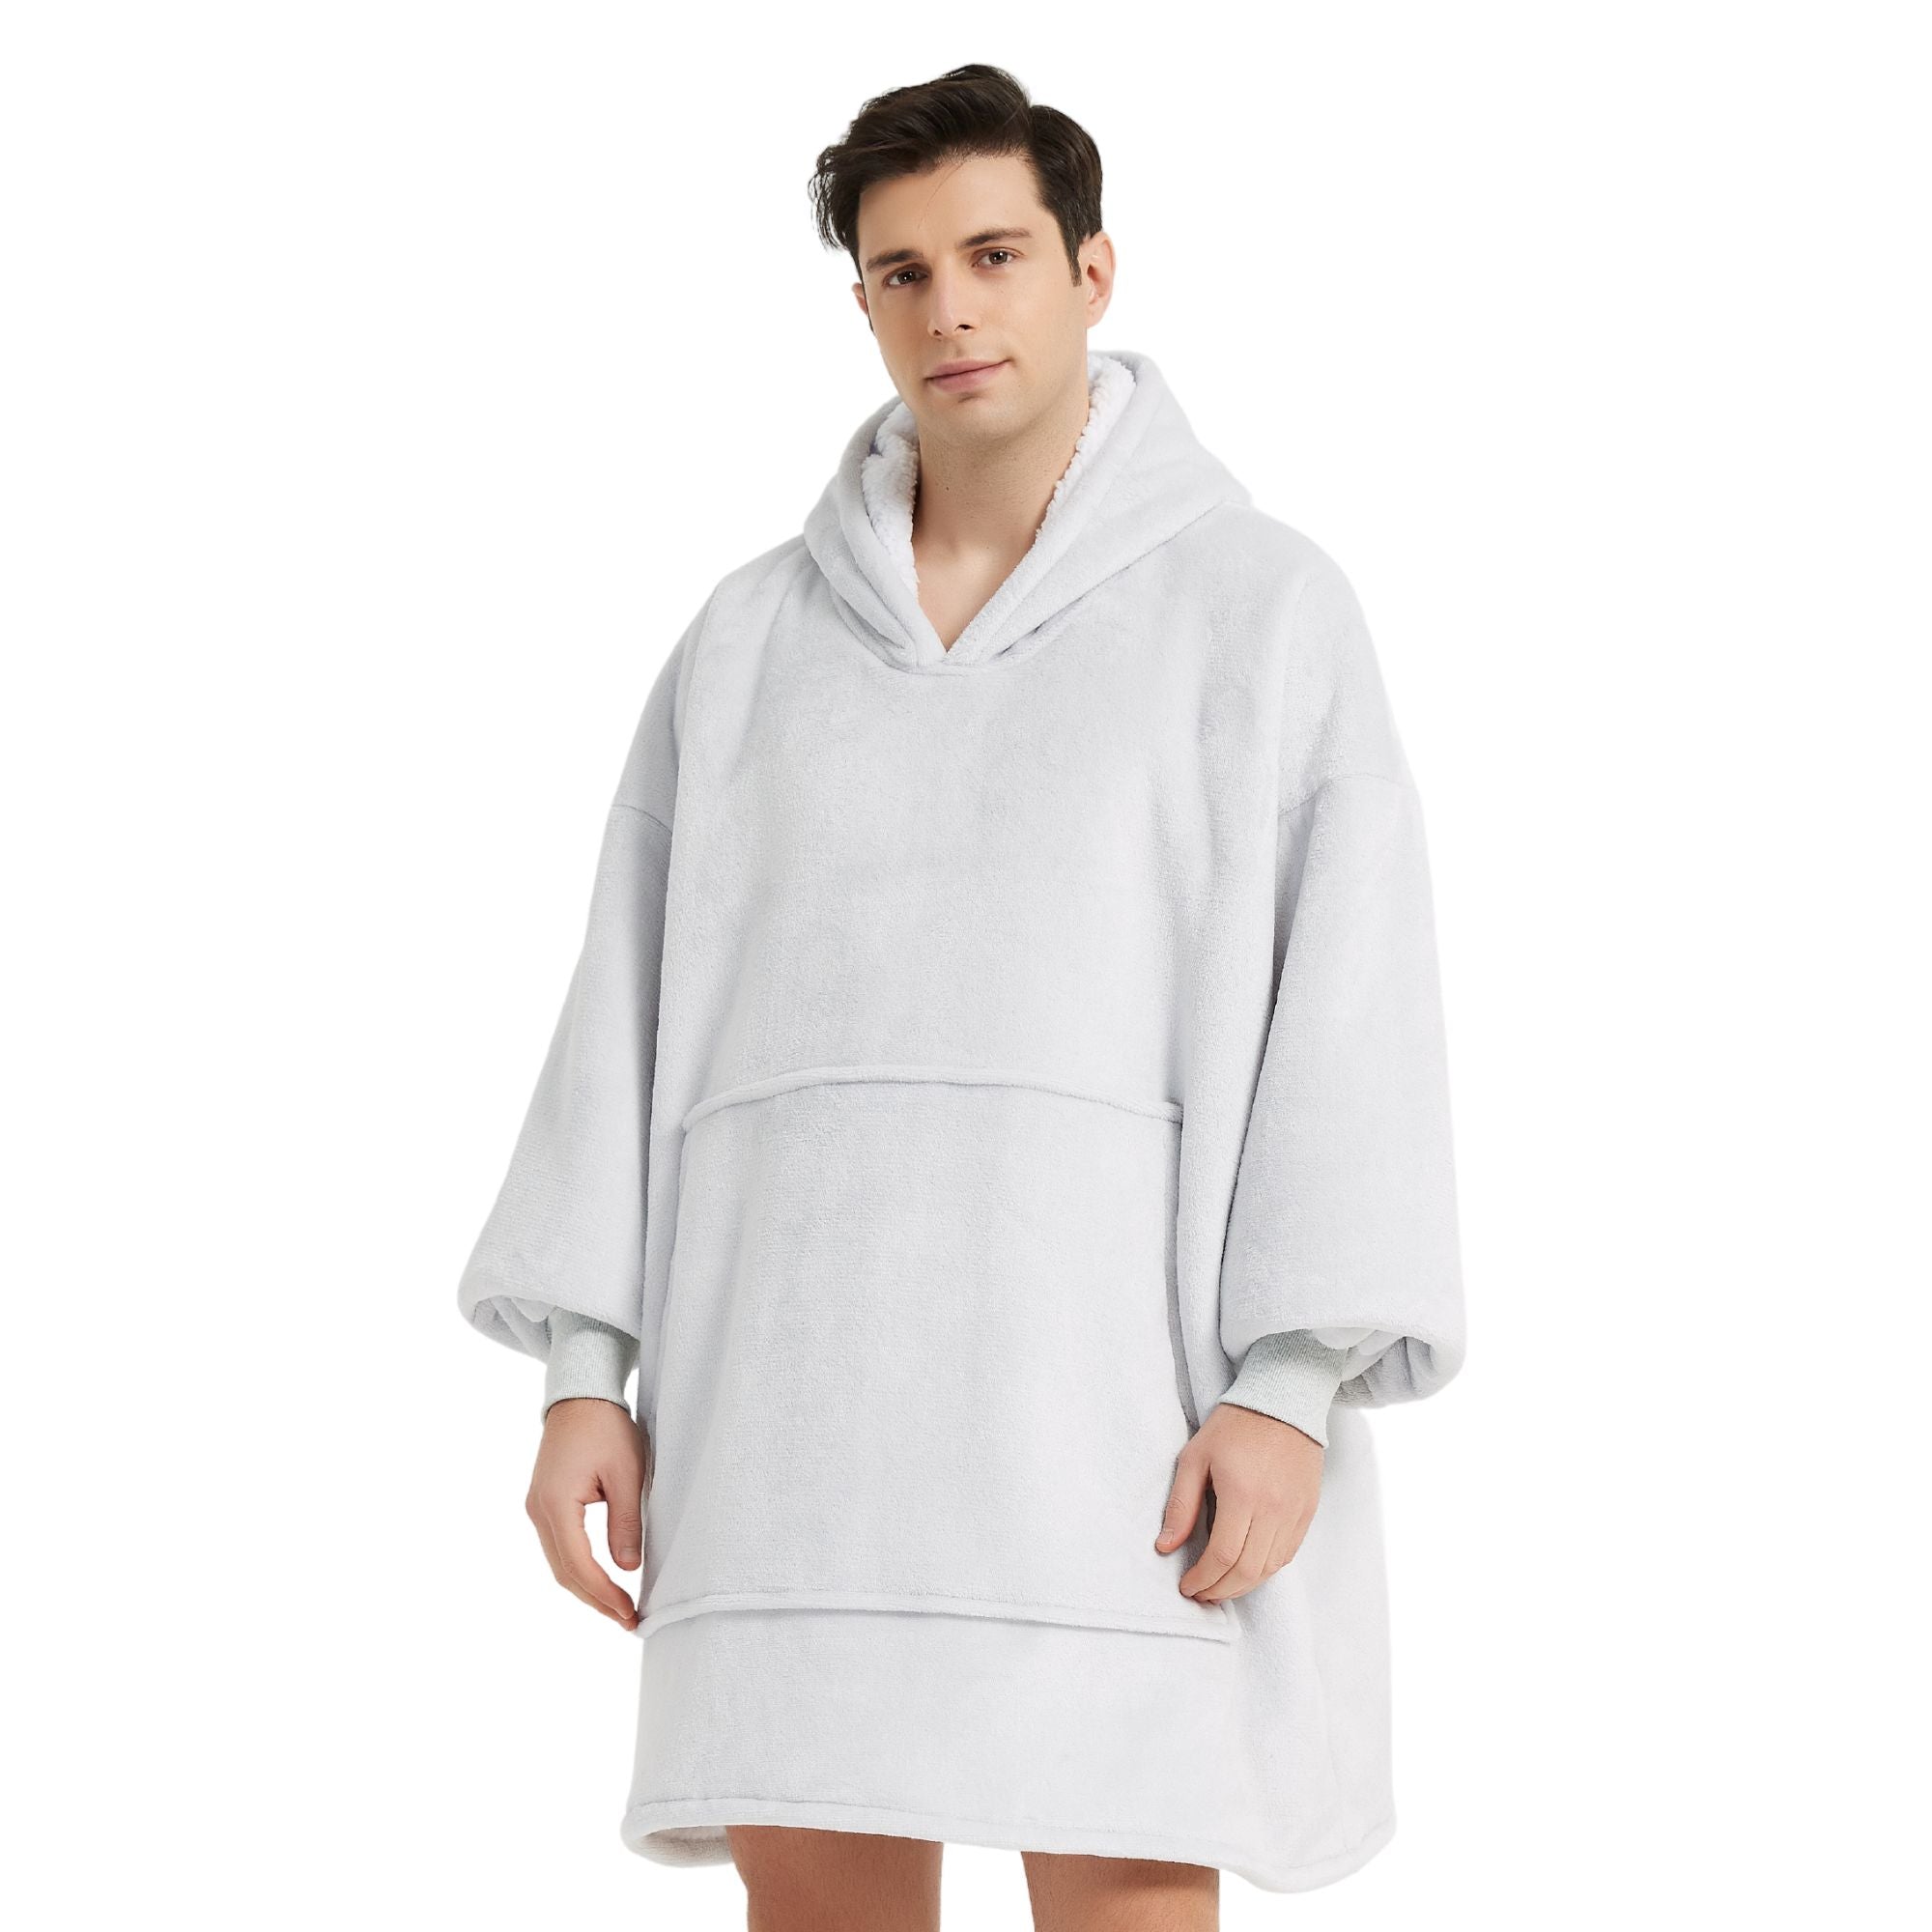 Pull Plaid Homme blanc argent Sweat Polaire Géant flanelle microfibre polyester The Oversized Hoodie